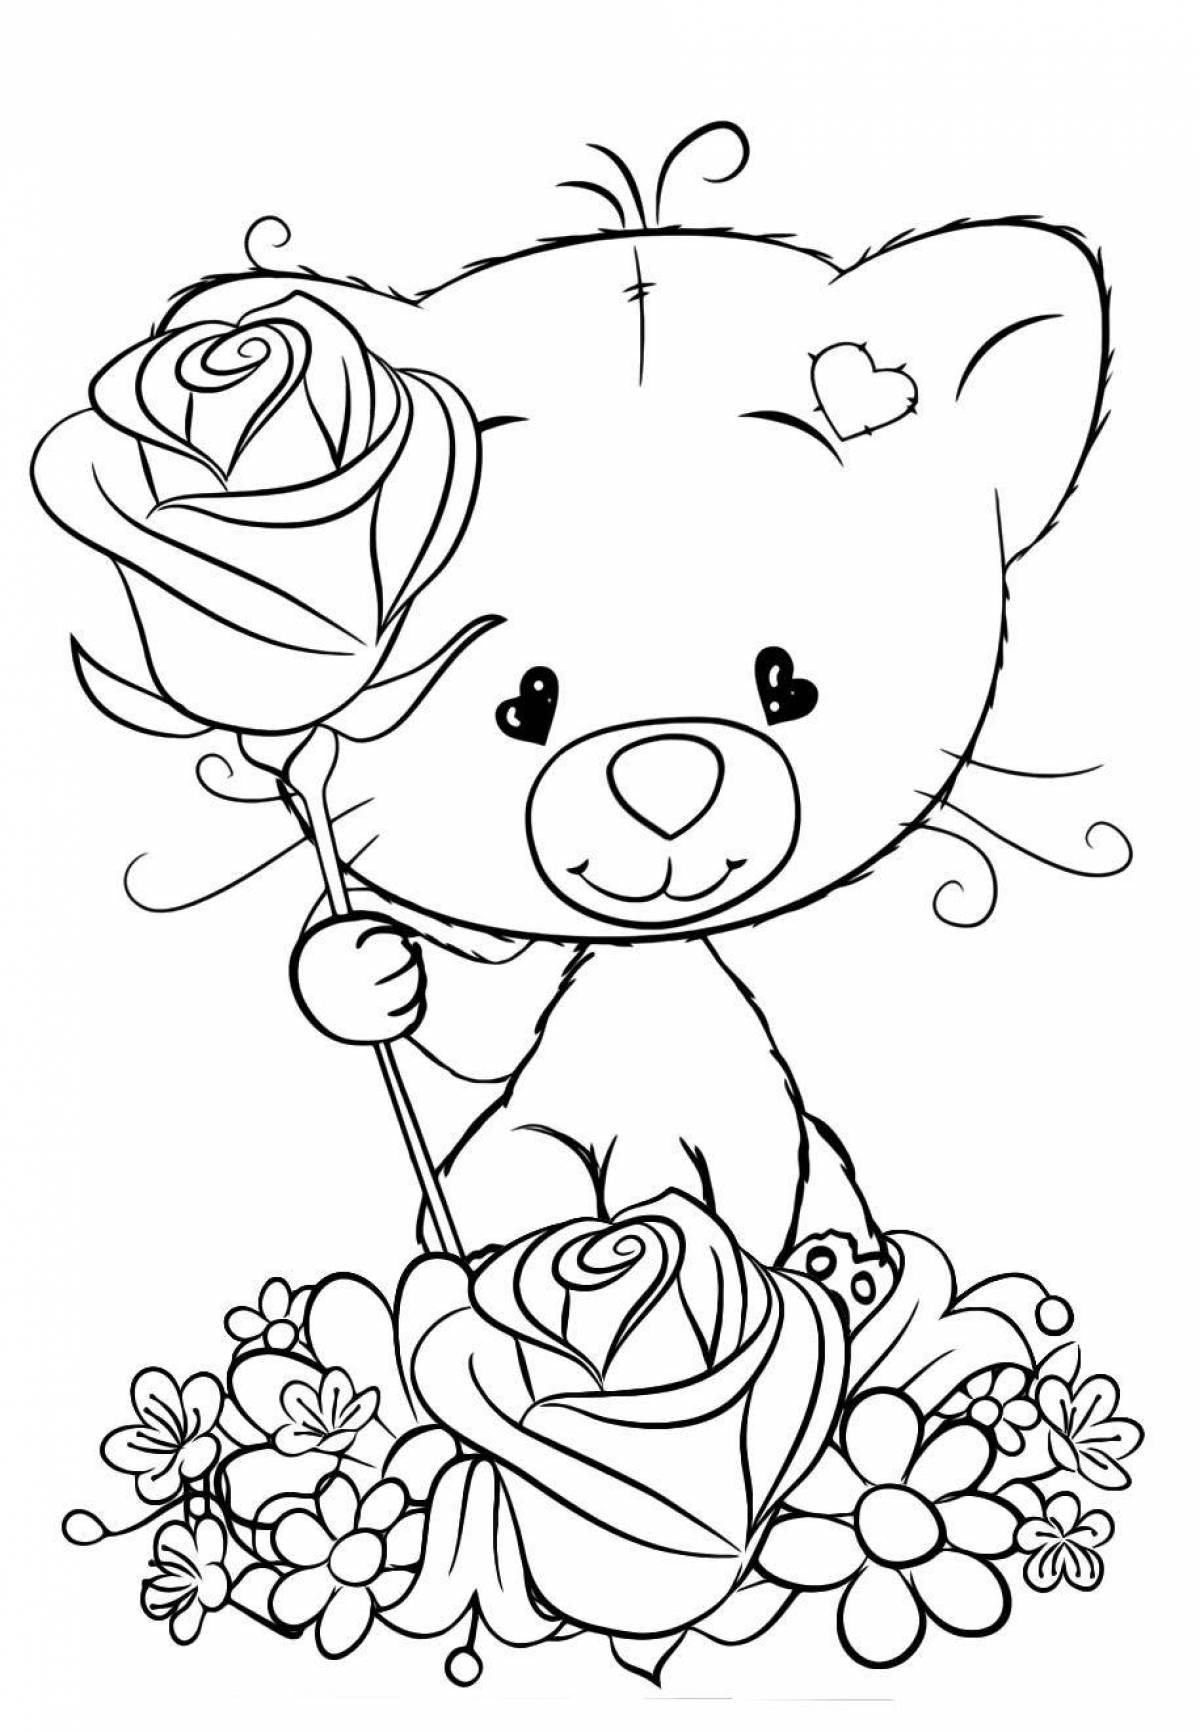 Colorful animal coloring pages for girls